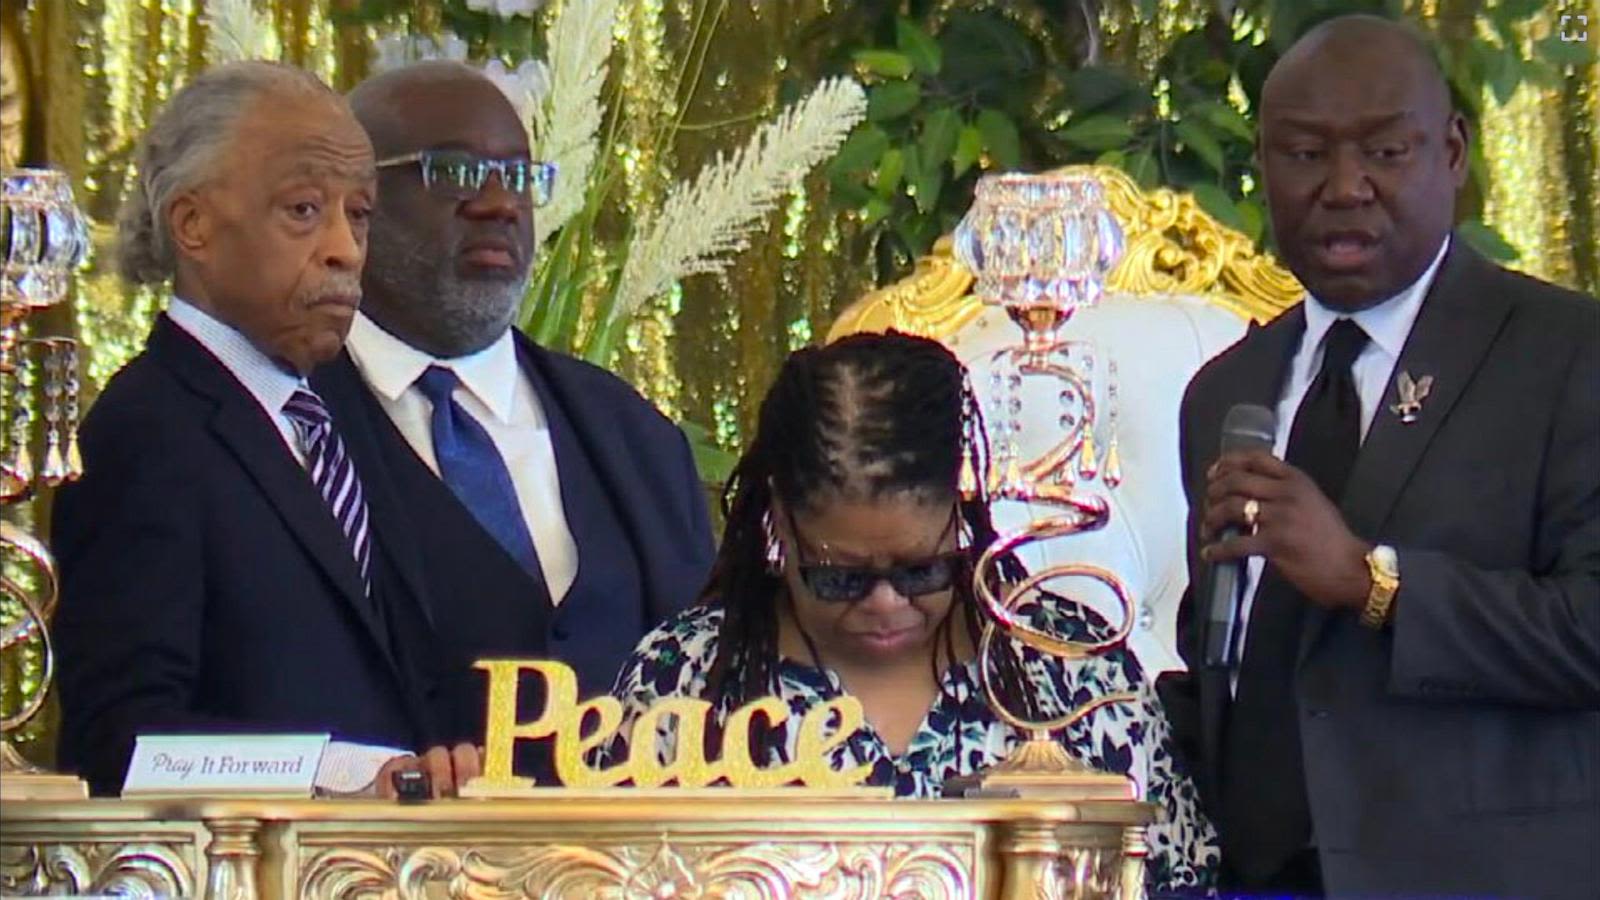 Rev. Al Sharpton and Ben Crump speak at funeral for Ohio man who died last month while in police custody